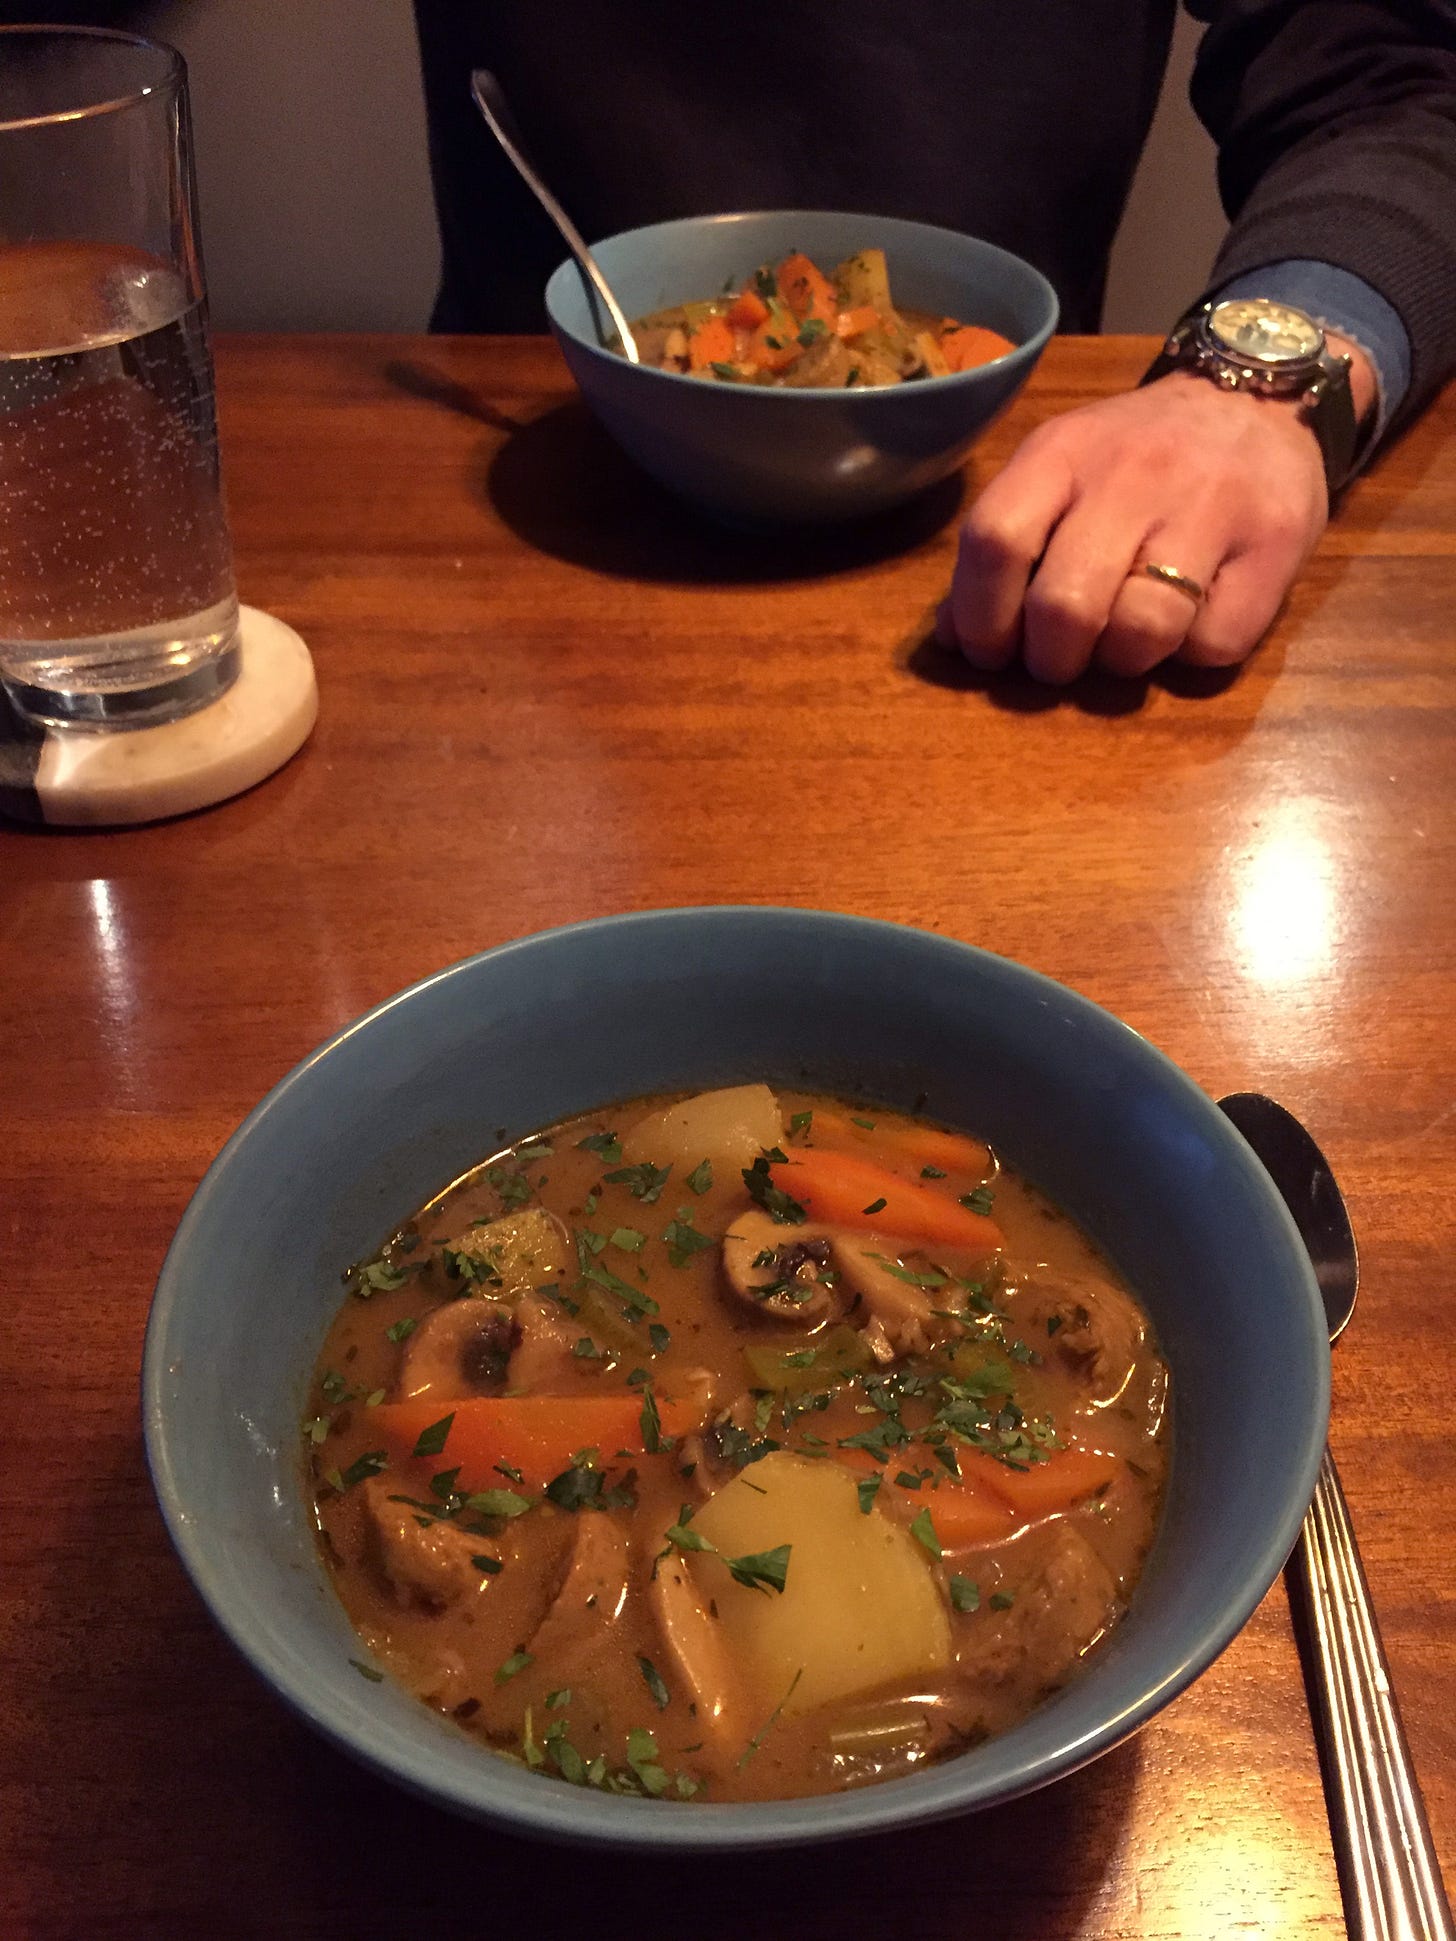 In two blue bowls across from each other, a bowl of stew made with potatoes, carrots, sausage, and mushrooms sprinkled with parsley